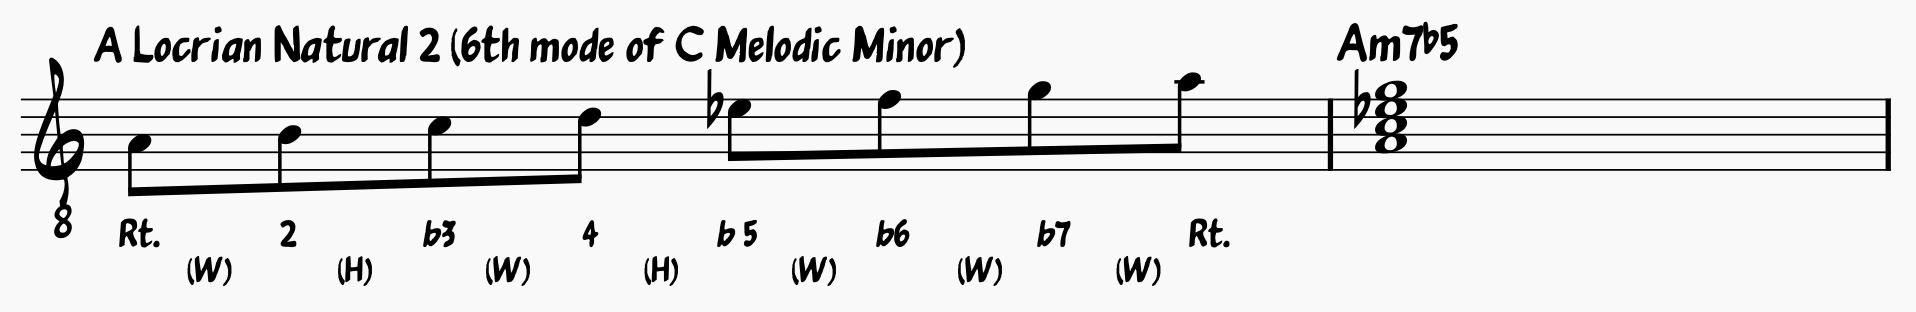 Locrian Flat 2; Sixth Mode of the Melodic Minor Scale